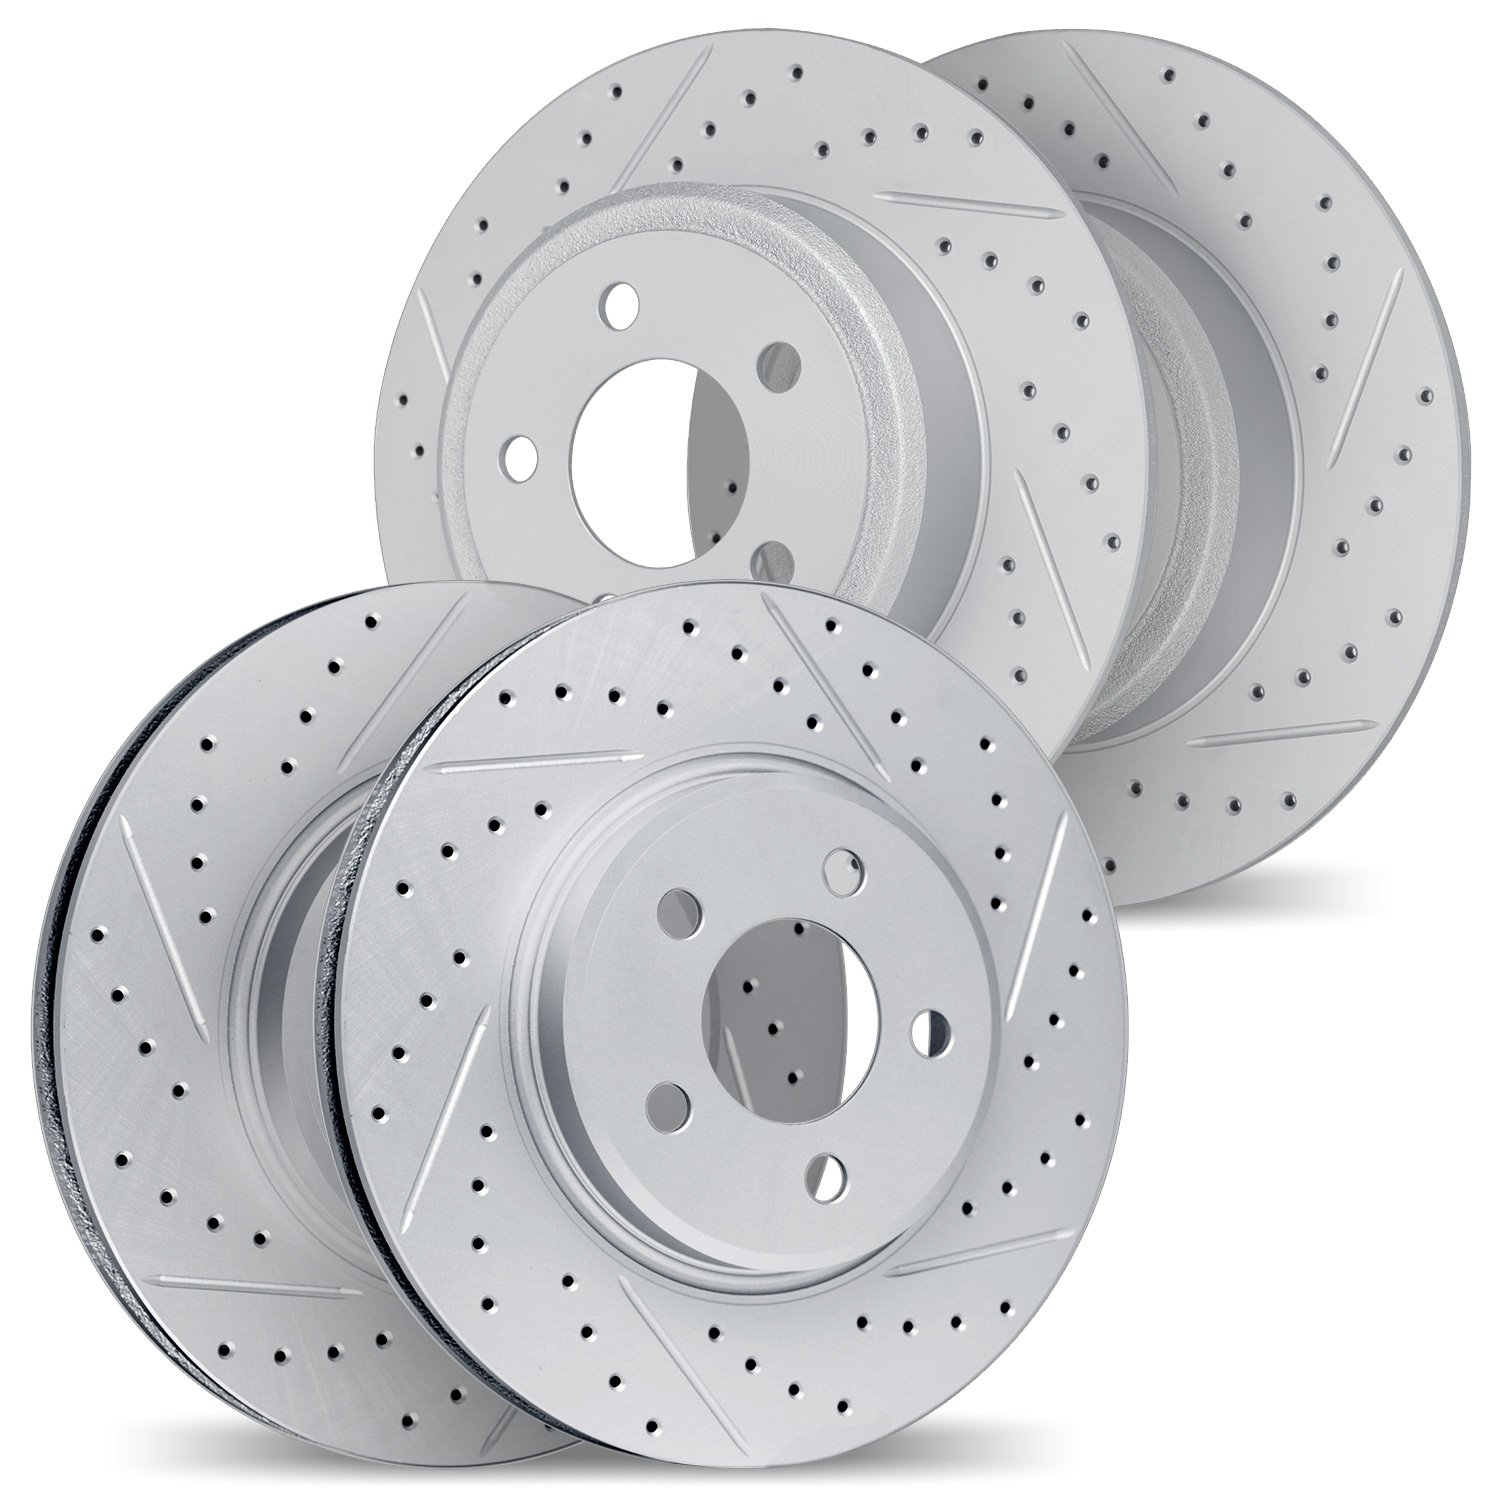 2004-58015 Geoperformance Drilled/Slotted Brake Rotors, 2015-2020 Acura/Honda, Position: Front and Rear